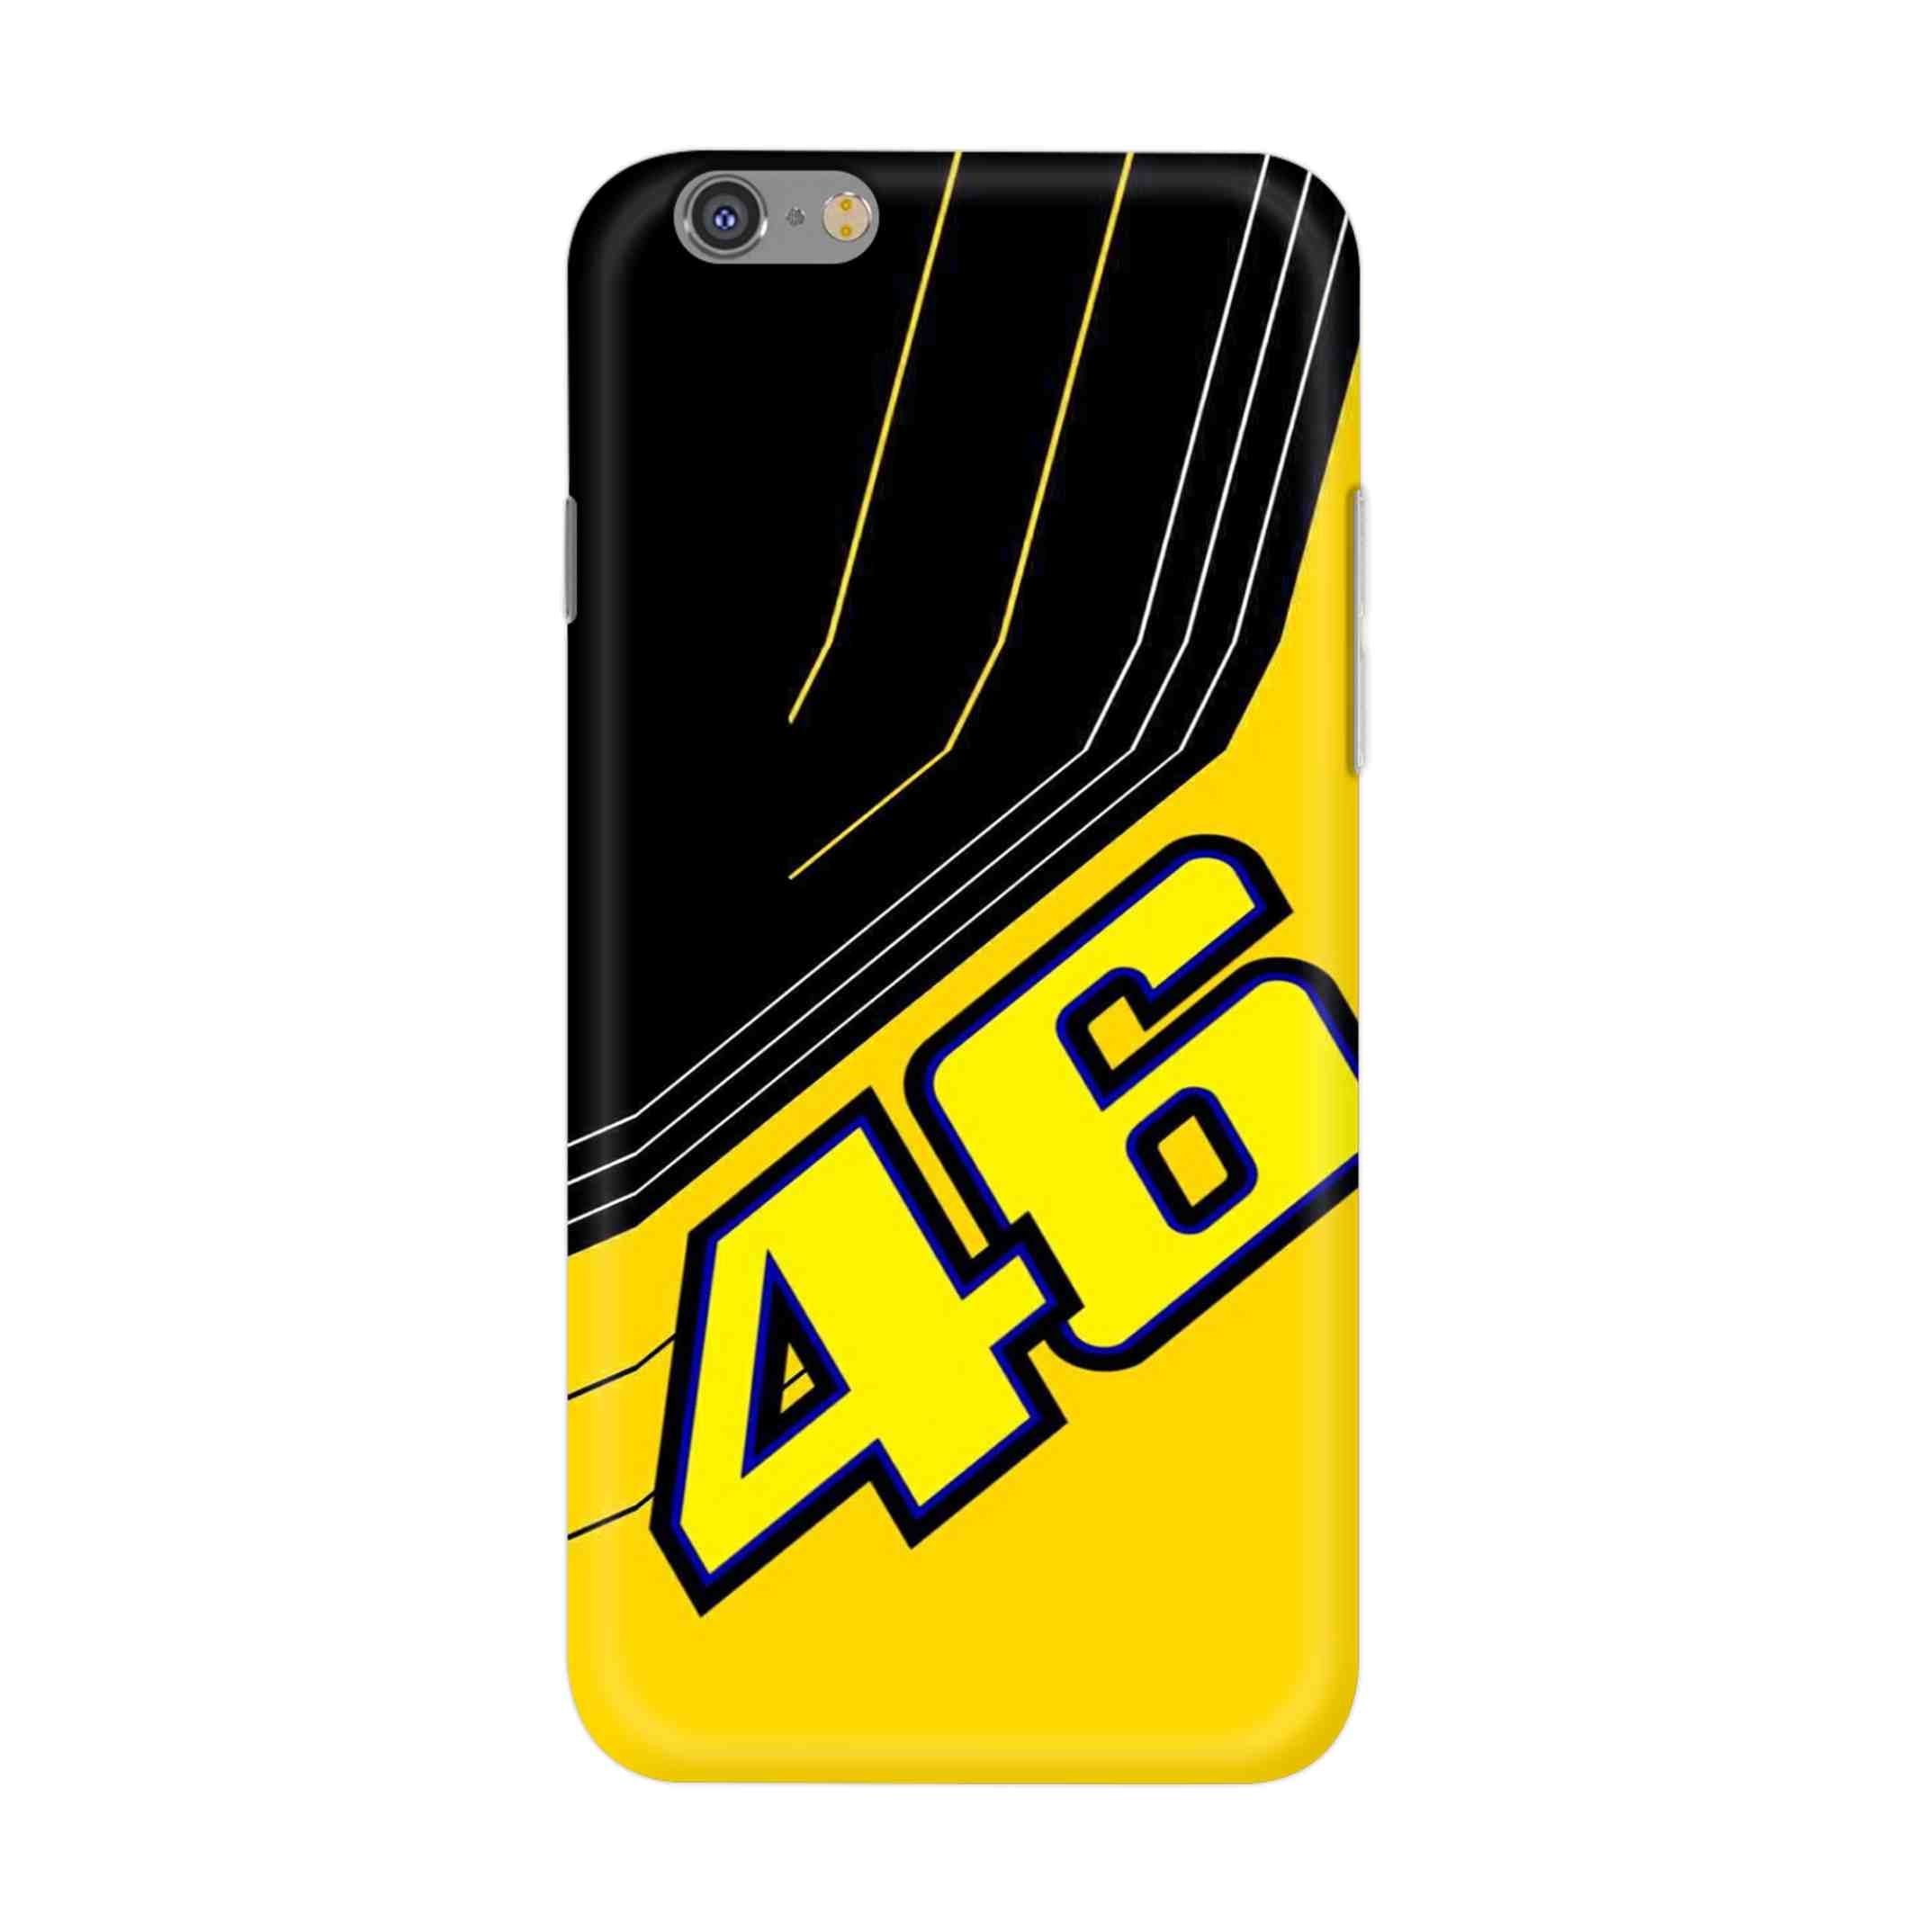 Buy 46 Hard Back Mobile Phone Case/Cover For iPhone 6 / 6s Online